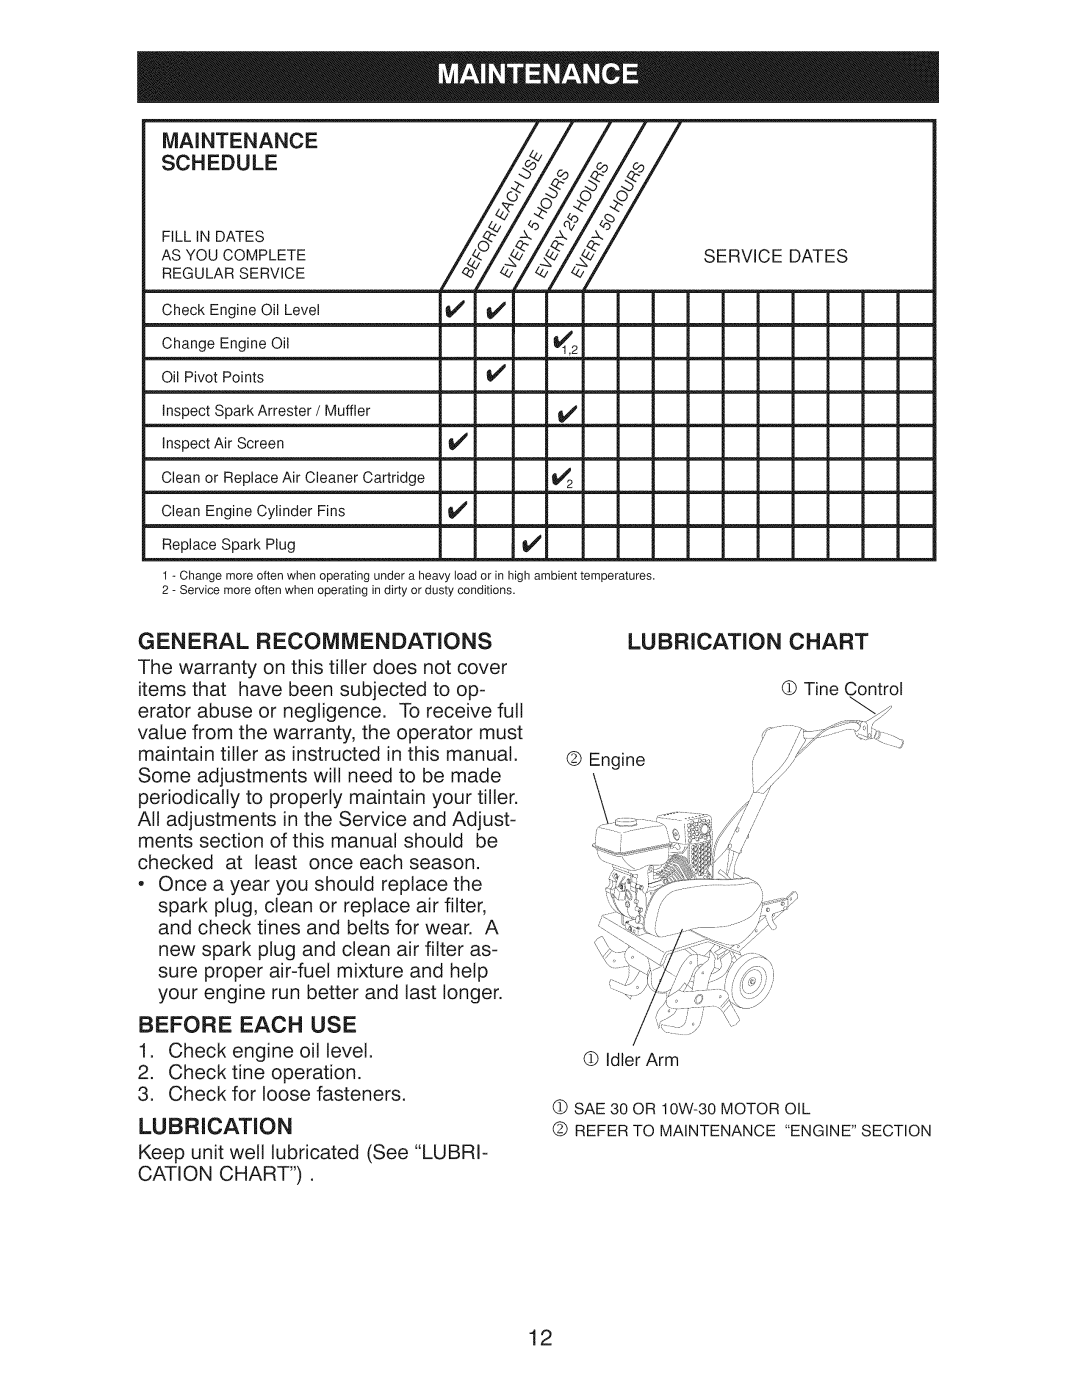 Craftsman 917.29921 Serwoedates, General Recommendations, Lubrication Chart, BEFORE EACH USE 1.Check engine oil level 